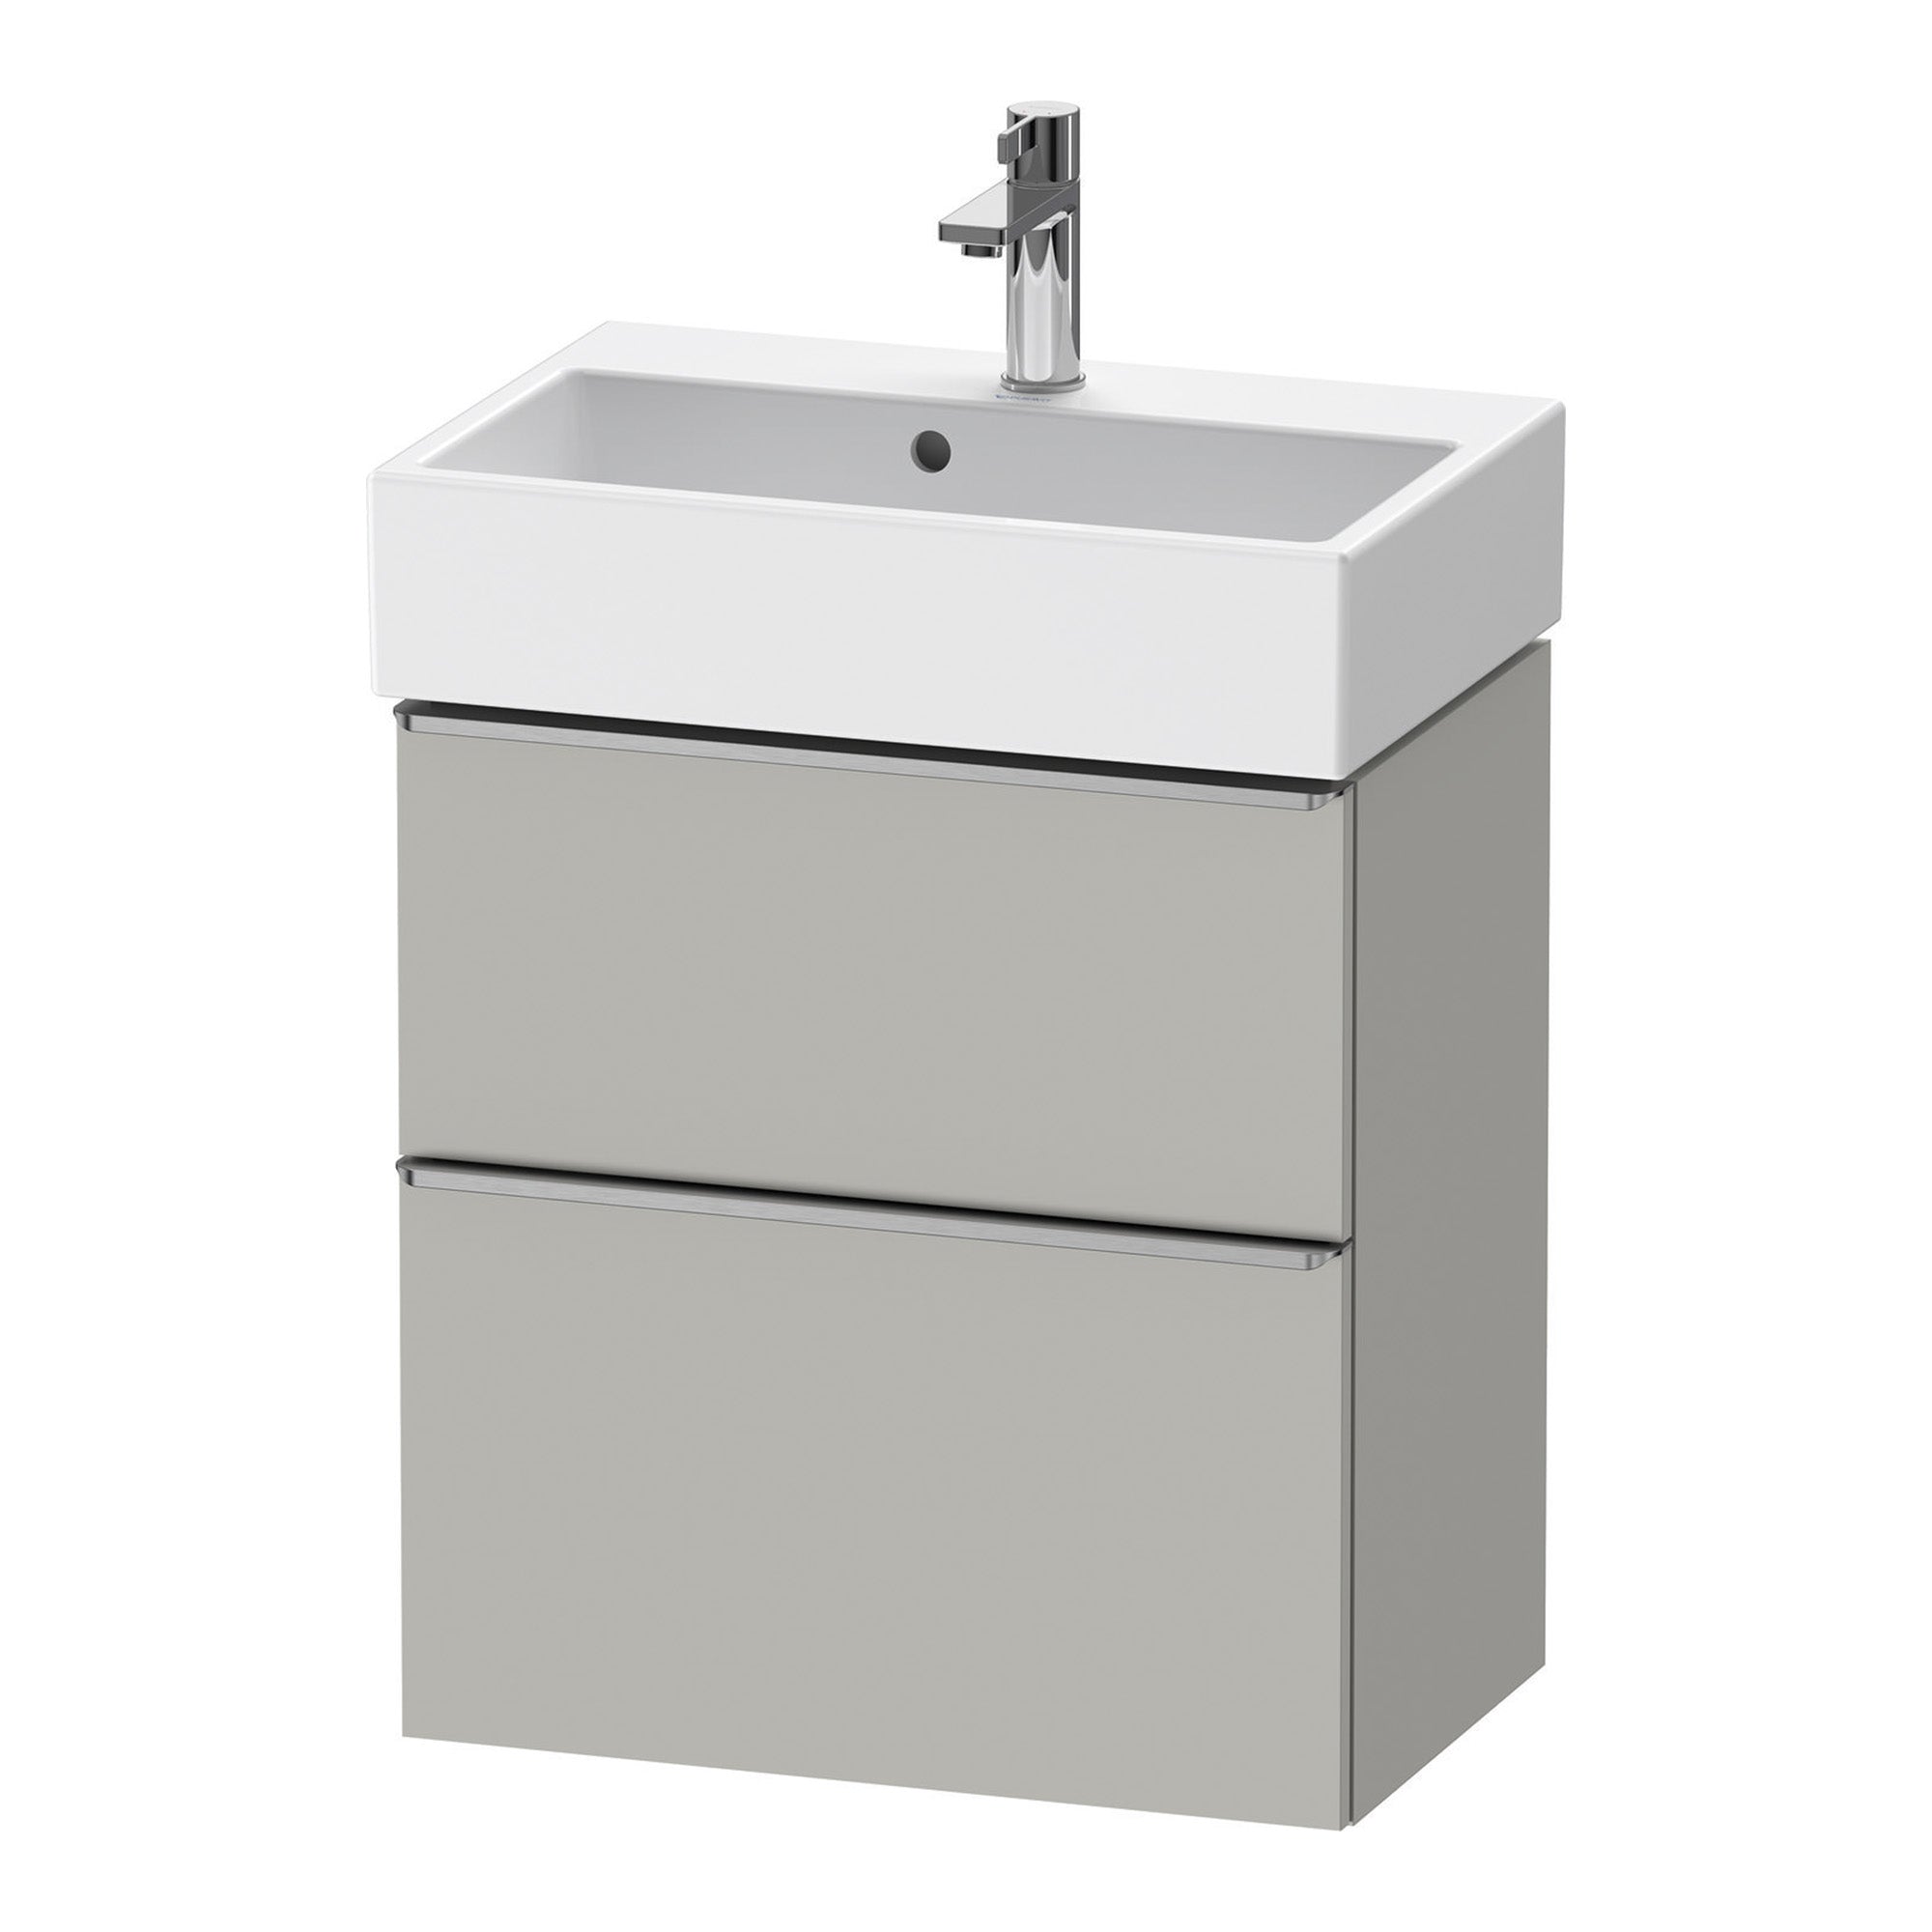 duravit d-neo 600 wall mounted vanity-unit with vero basin concrete grey stainless steel handles